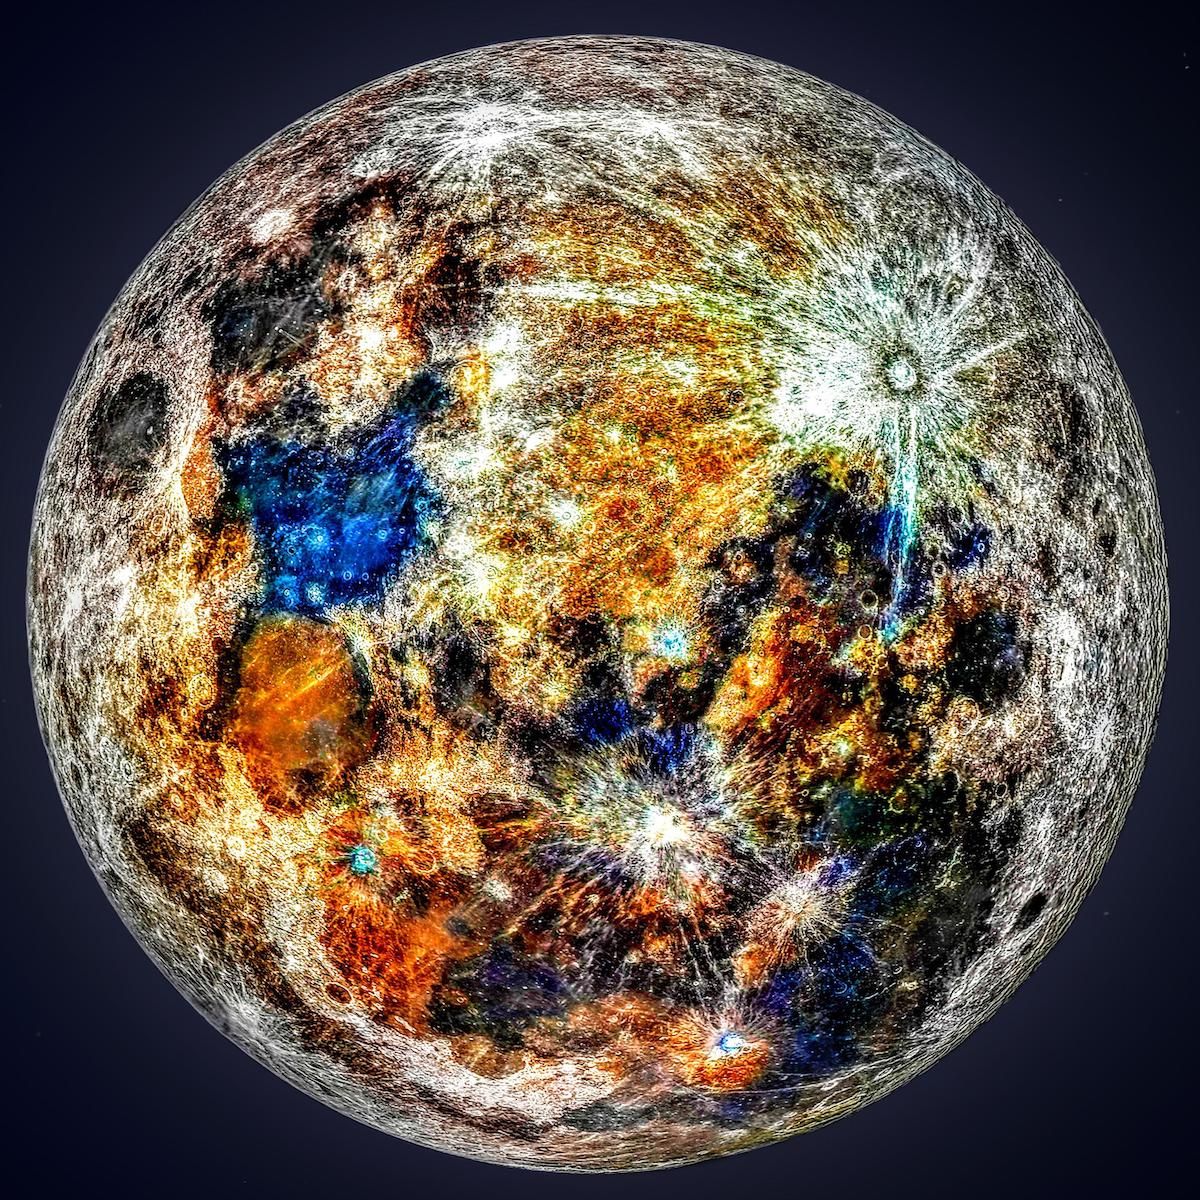 150,000 Photographs Used to Show the Hidden Colors of the Moon